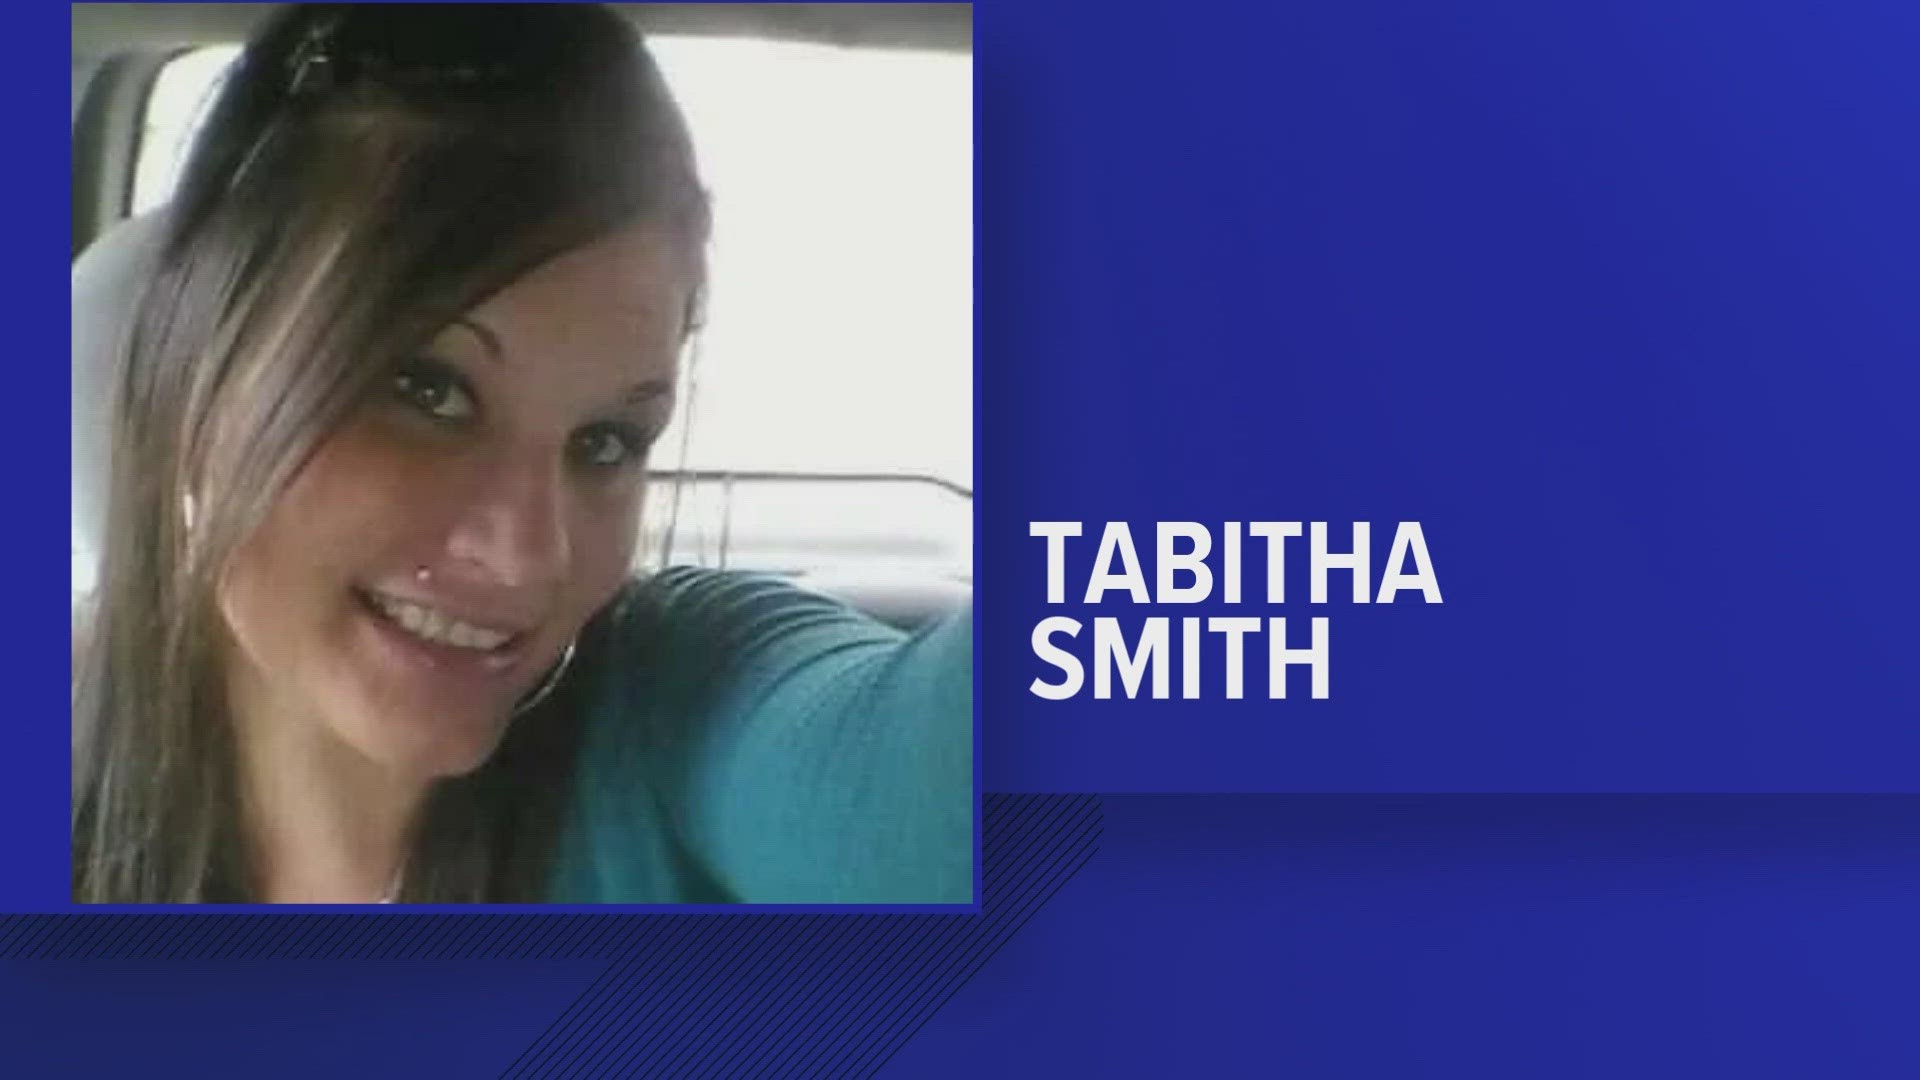 Tabitha Smith was found dead in the backseat of a Meigs County cruiser after he drove into the Tennessee River. The deputy, Robert Leonard, also died.